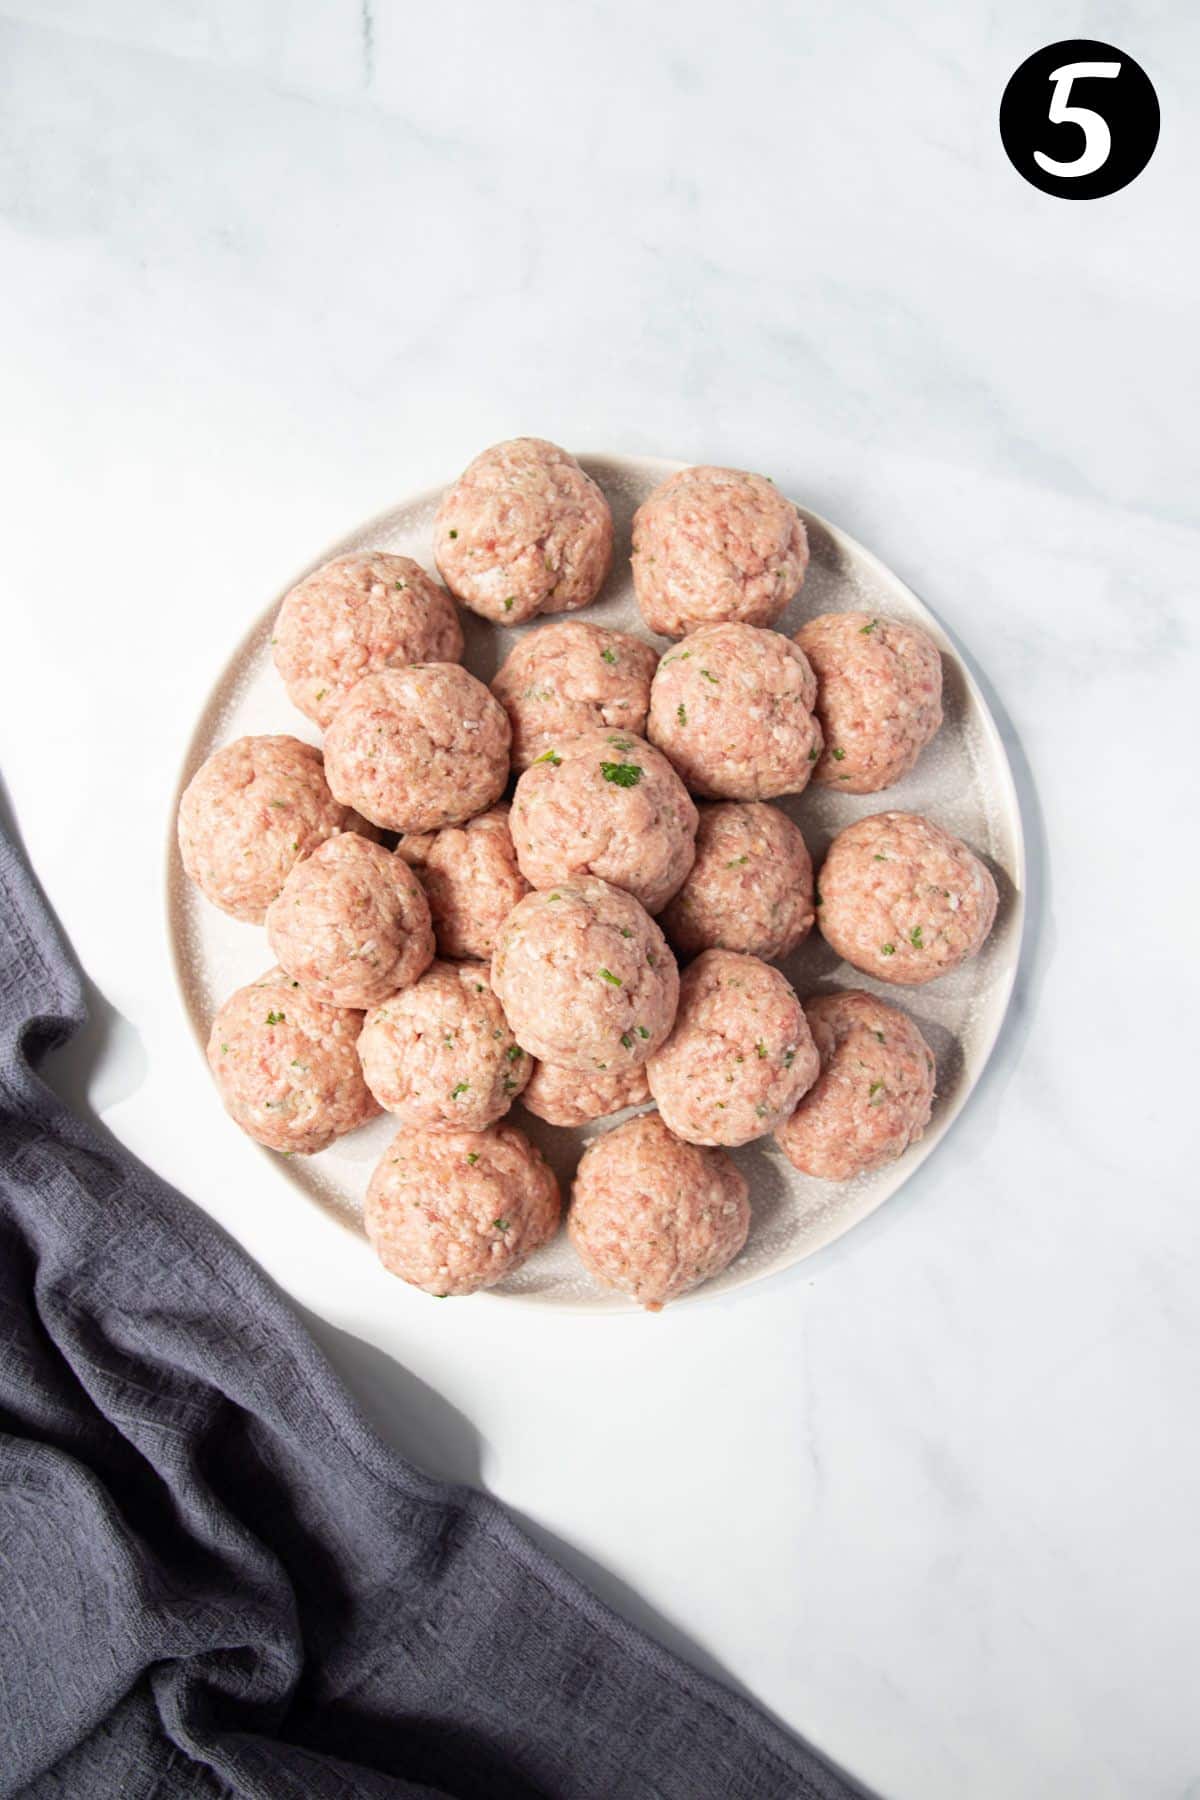 raw meatballs on a plate.